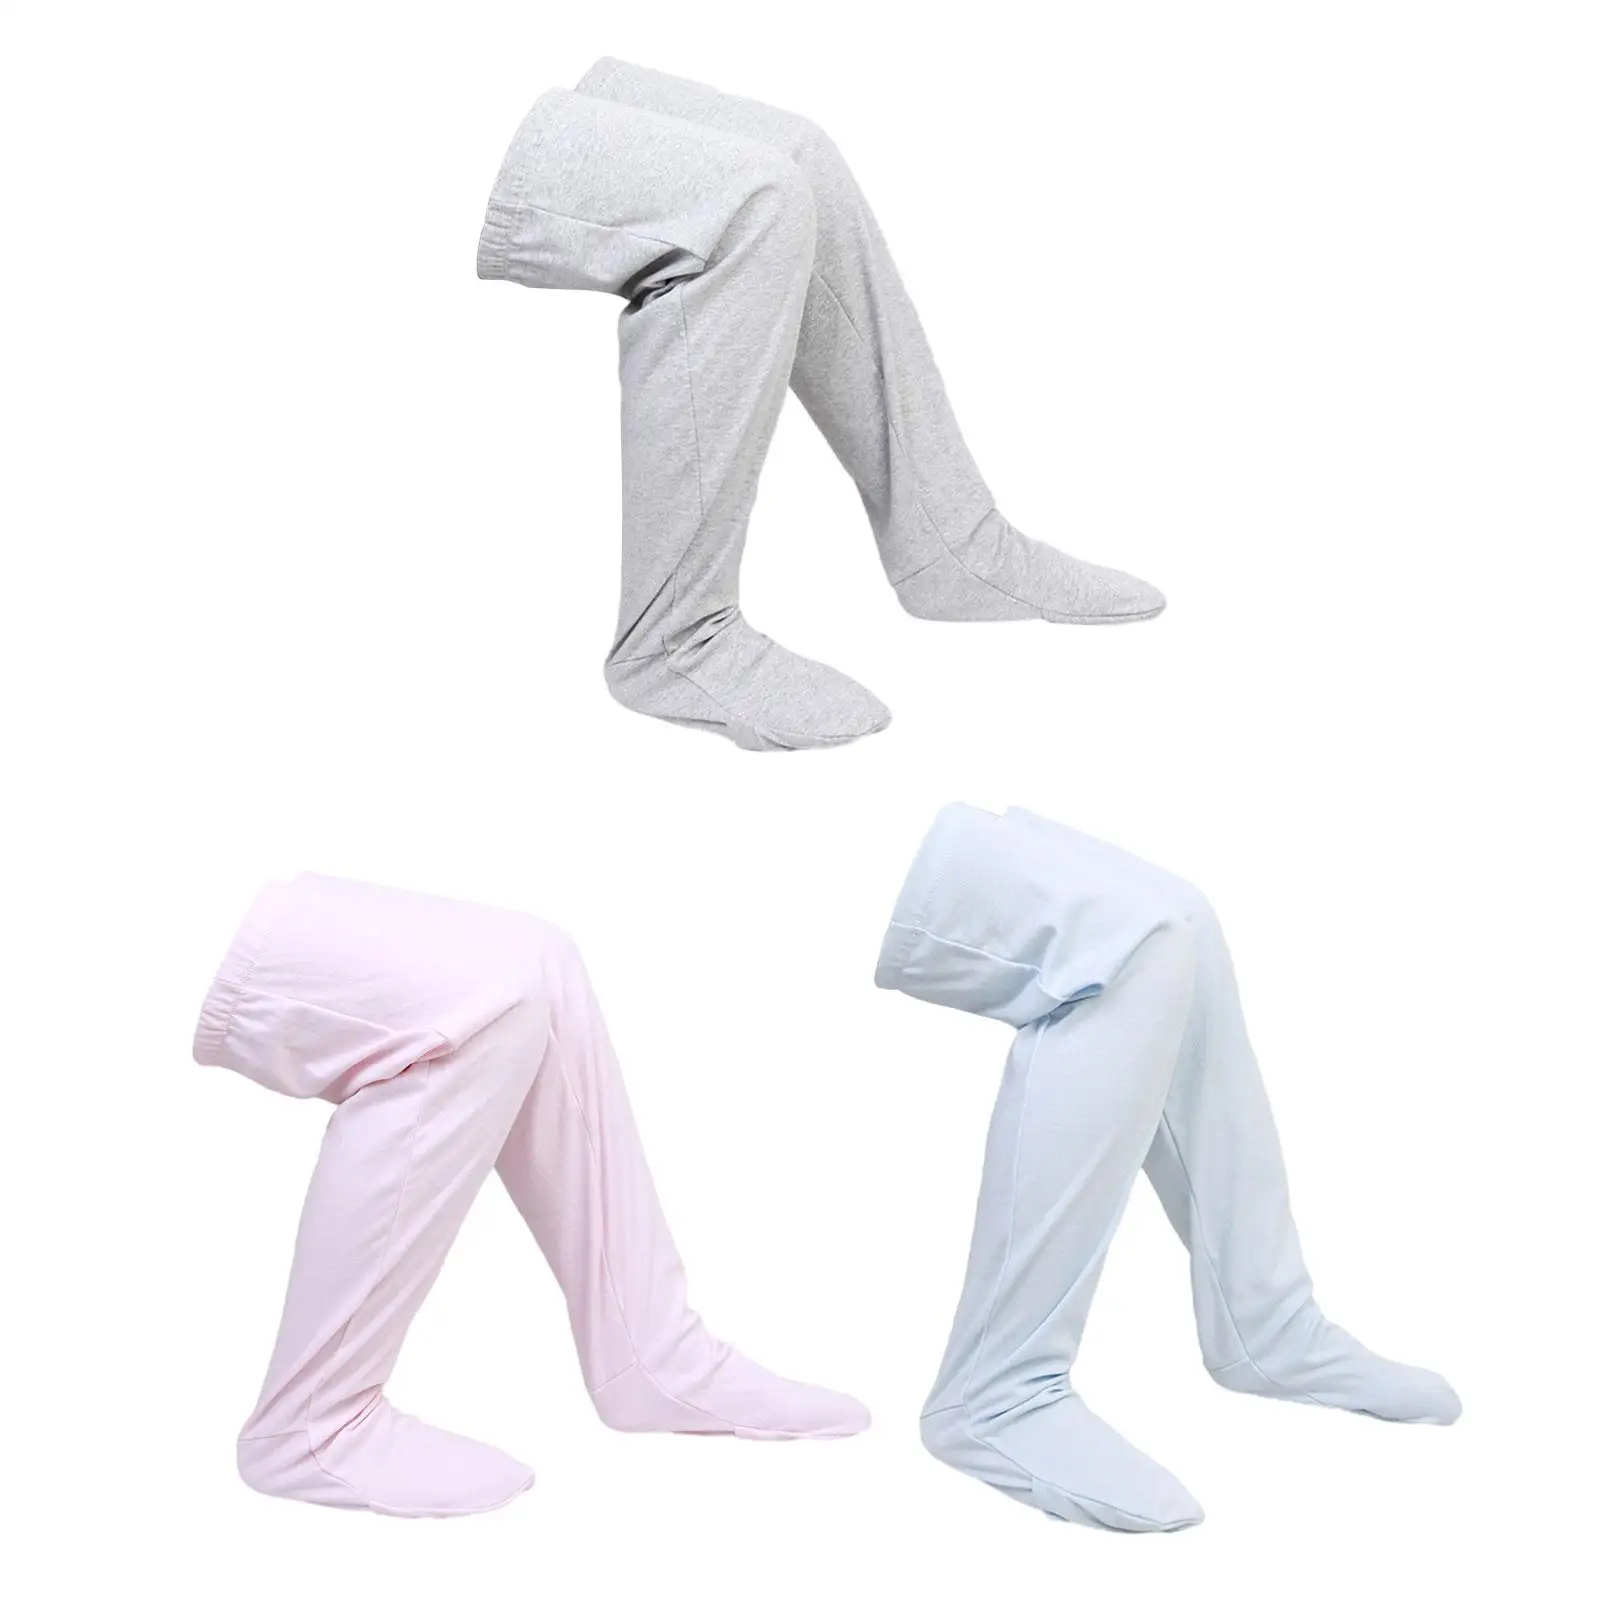 Sleep Socks Elastic All Seasons Lightweight Foot Cover for Air Conditioned Rooms Women Men The Aged Father Mother Apartment